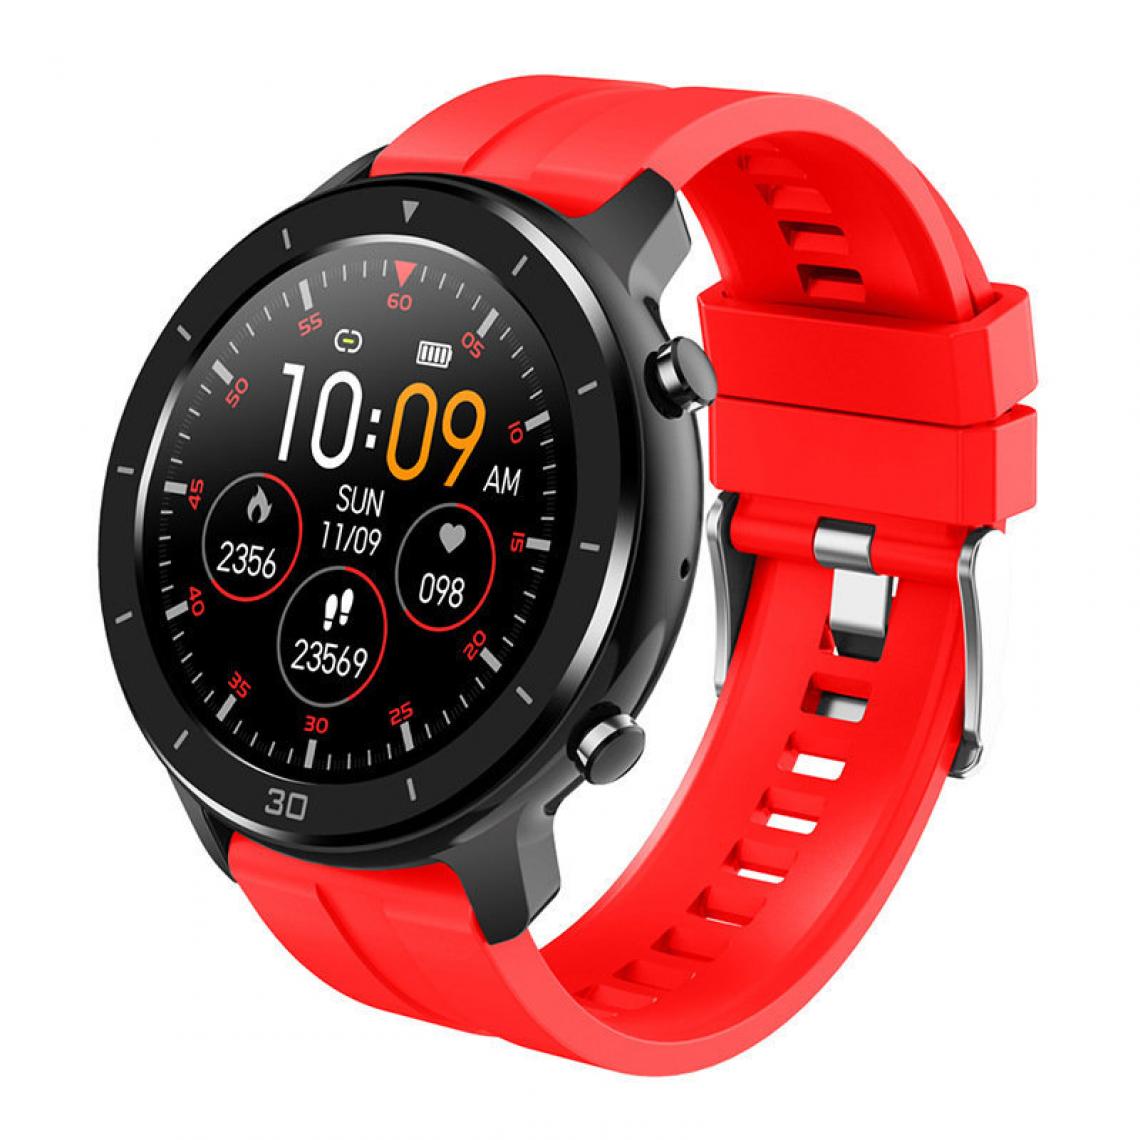 Chronotech Montres - Sports Watches for Men Waterproof, 1.28 inch Ips Dial, Exercise/Sleep Data Monitoring, Message/Call Reminder, Remote Camera, Bluetooth Music, Smartwatches That Text and Call (Red) - Montre connectée